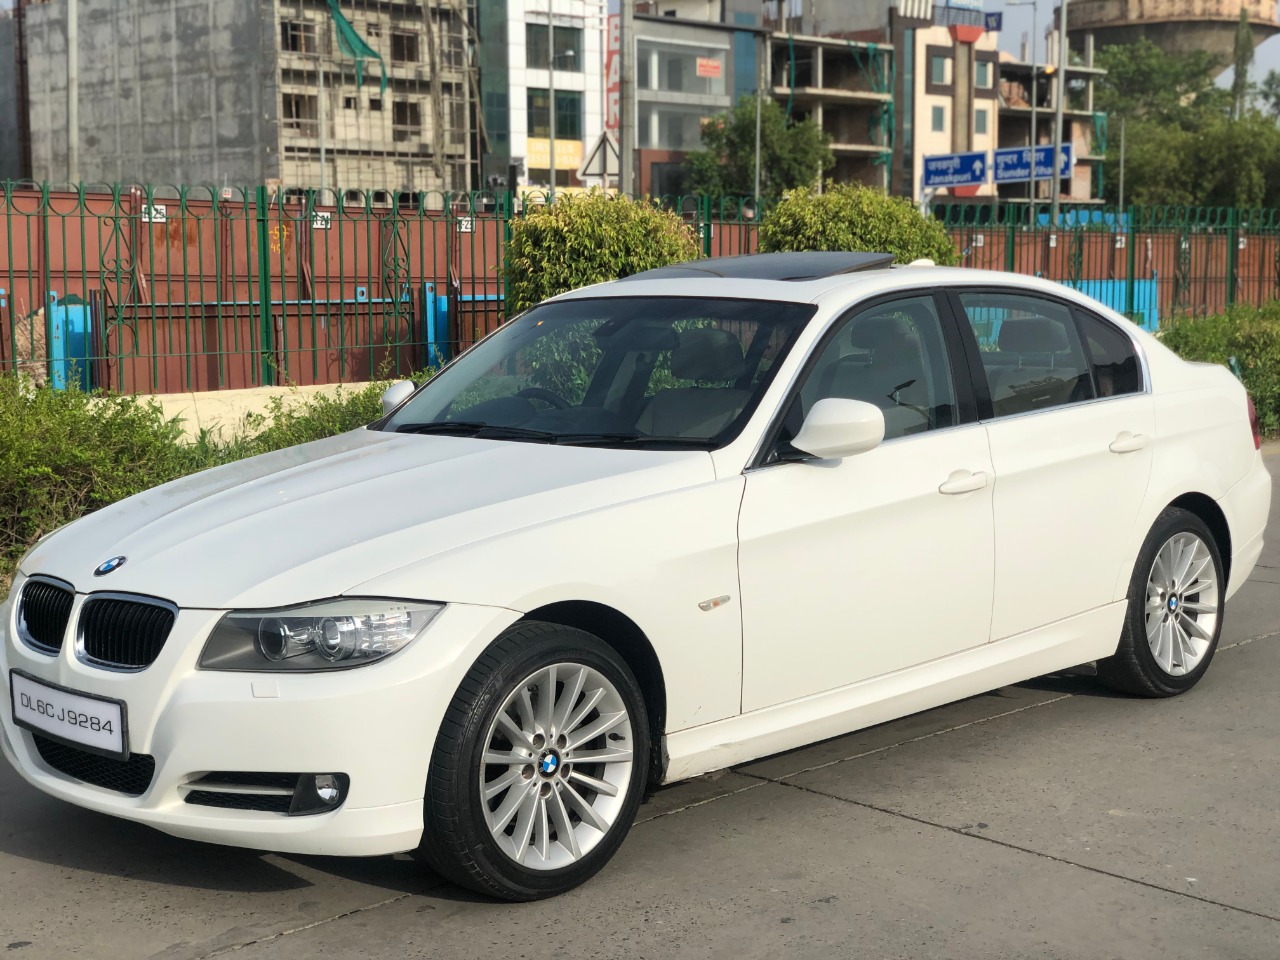 Detectable moderadamente Gran roble BMW 320d 2011 Highline | Sunroof - Display Screen - Electronic Steering |  TOP MODEL | 16,000 KM Only - Delhi Cars Co. by Taran Batra